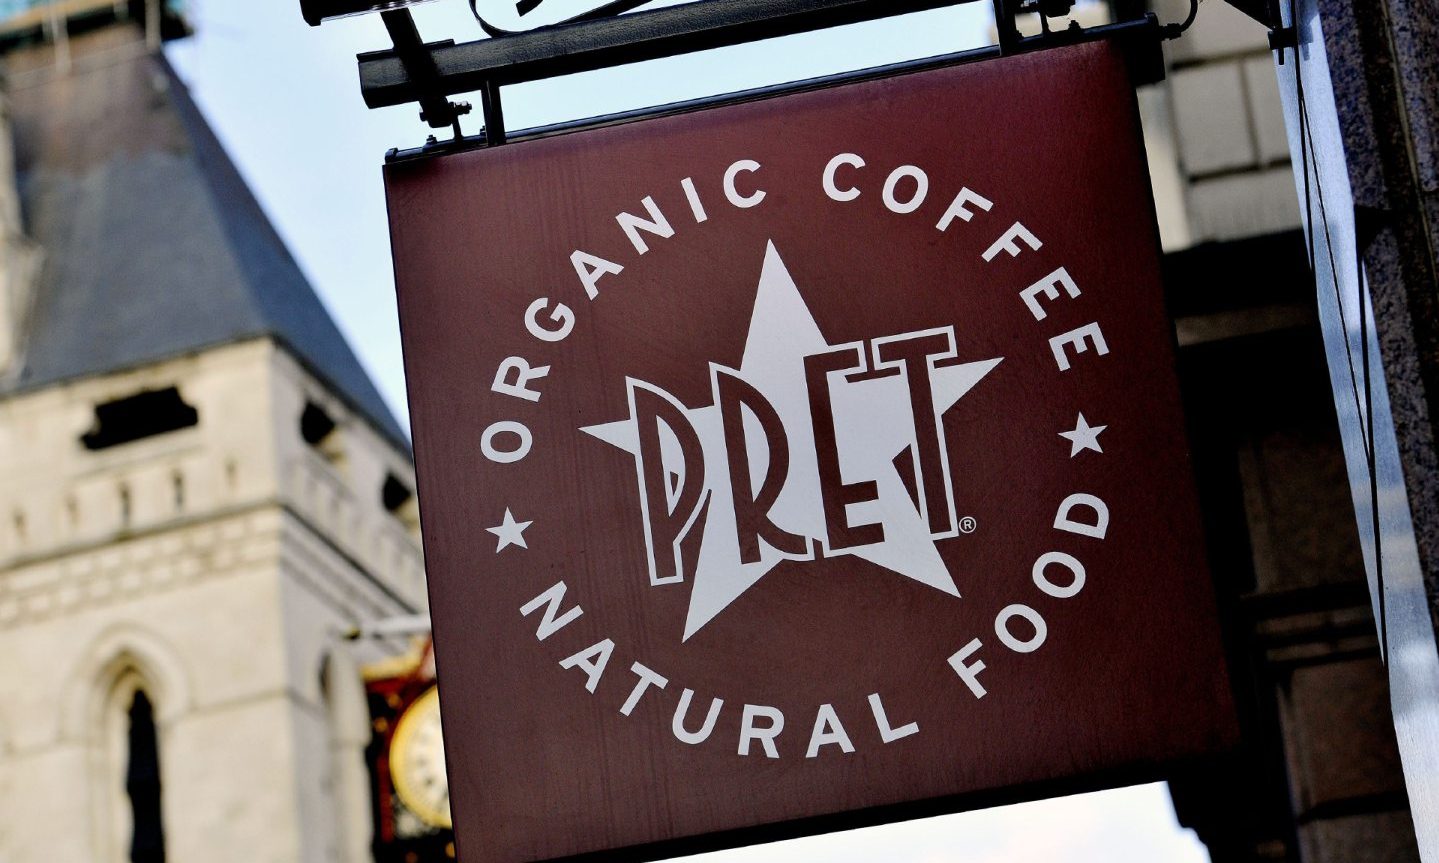 Sandwich chain Pret A Manger set to open in Broughty Ferry